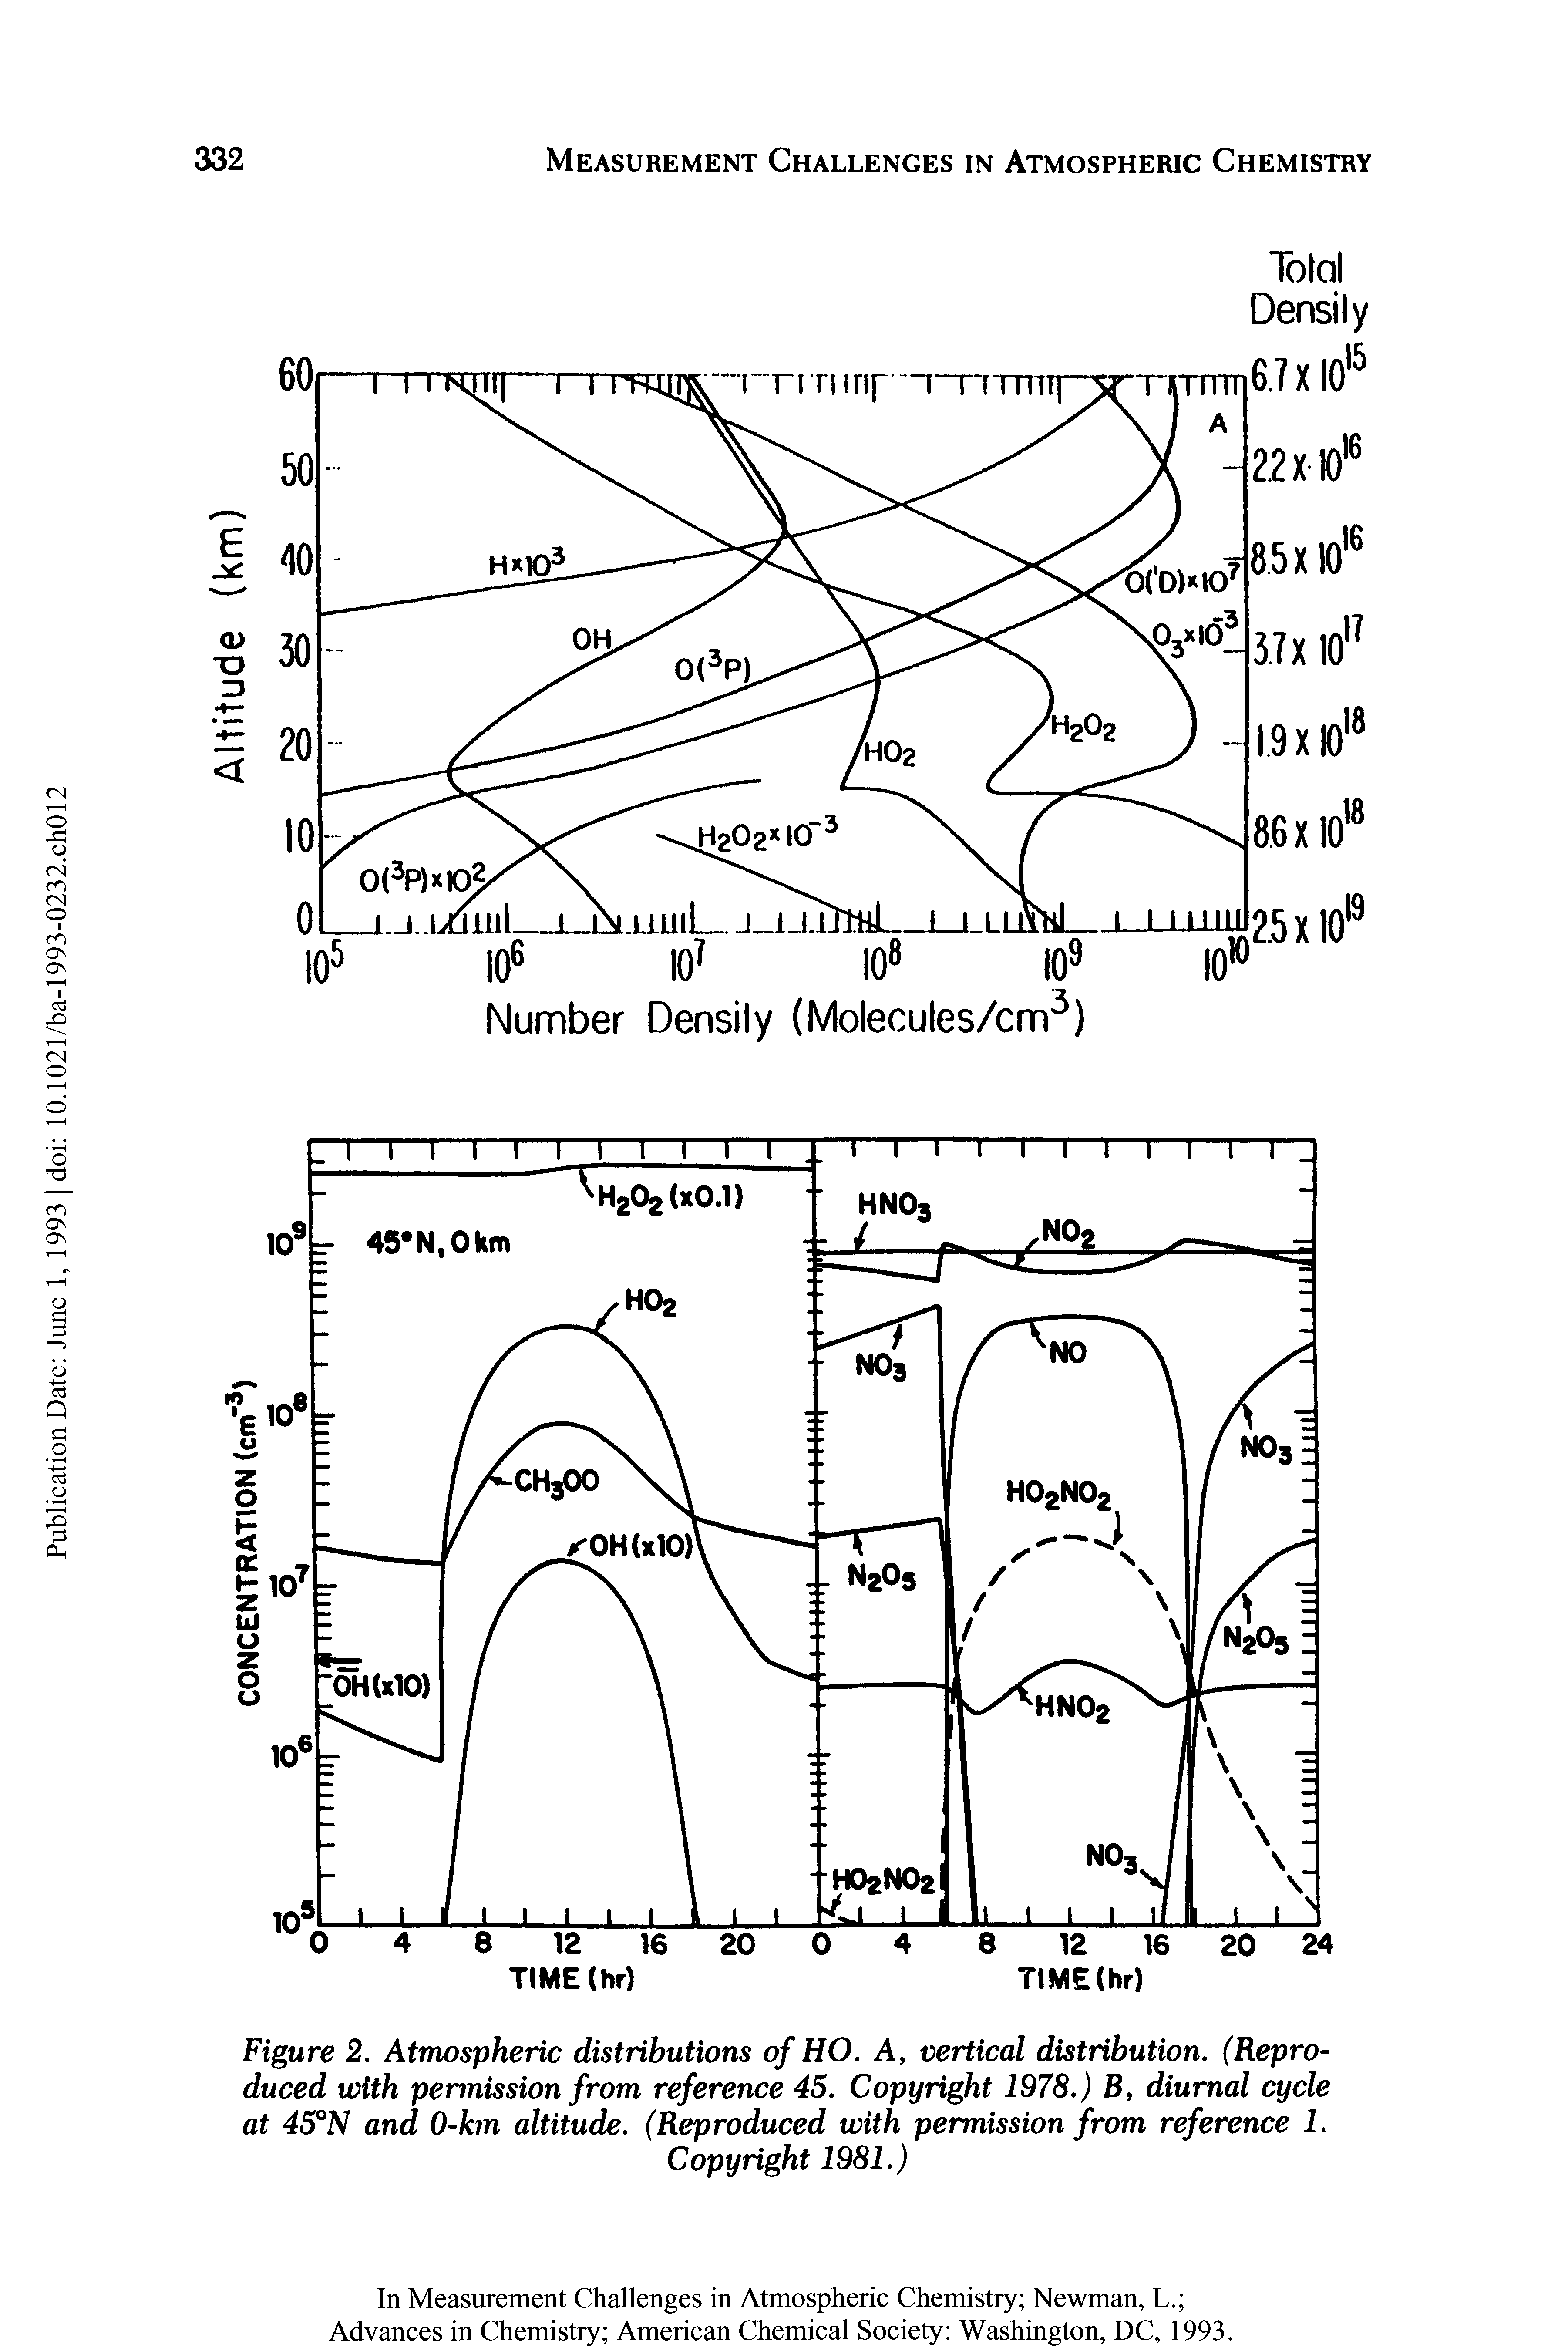 Figure 2. Atmospheric distributions of HO. A, vertical distribution. (Reproduced with permission from reference 45. Copyright 1978.) B, diurnal cycle at 45°N and 0-kin altitude. (Reproduced with permission from reference 1.